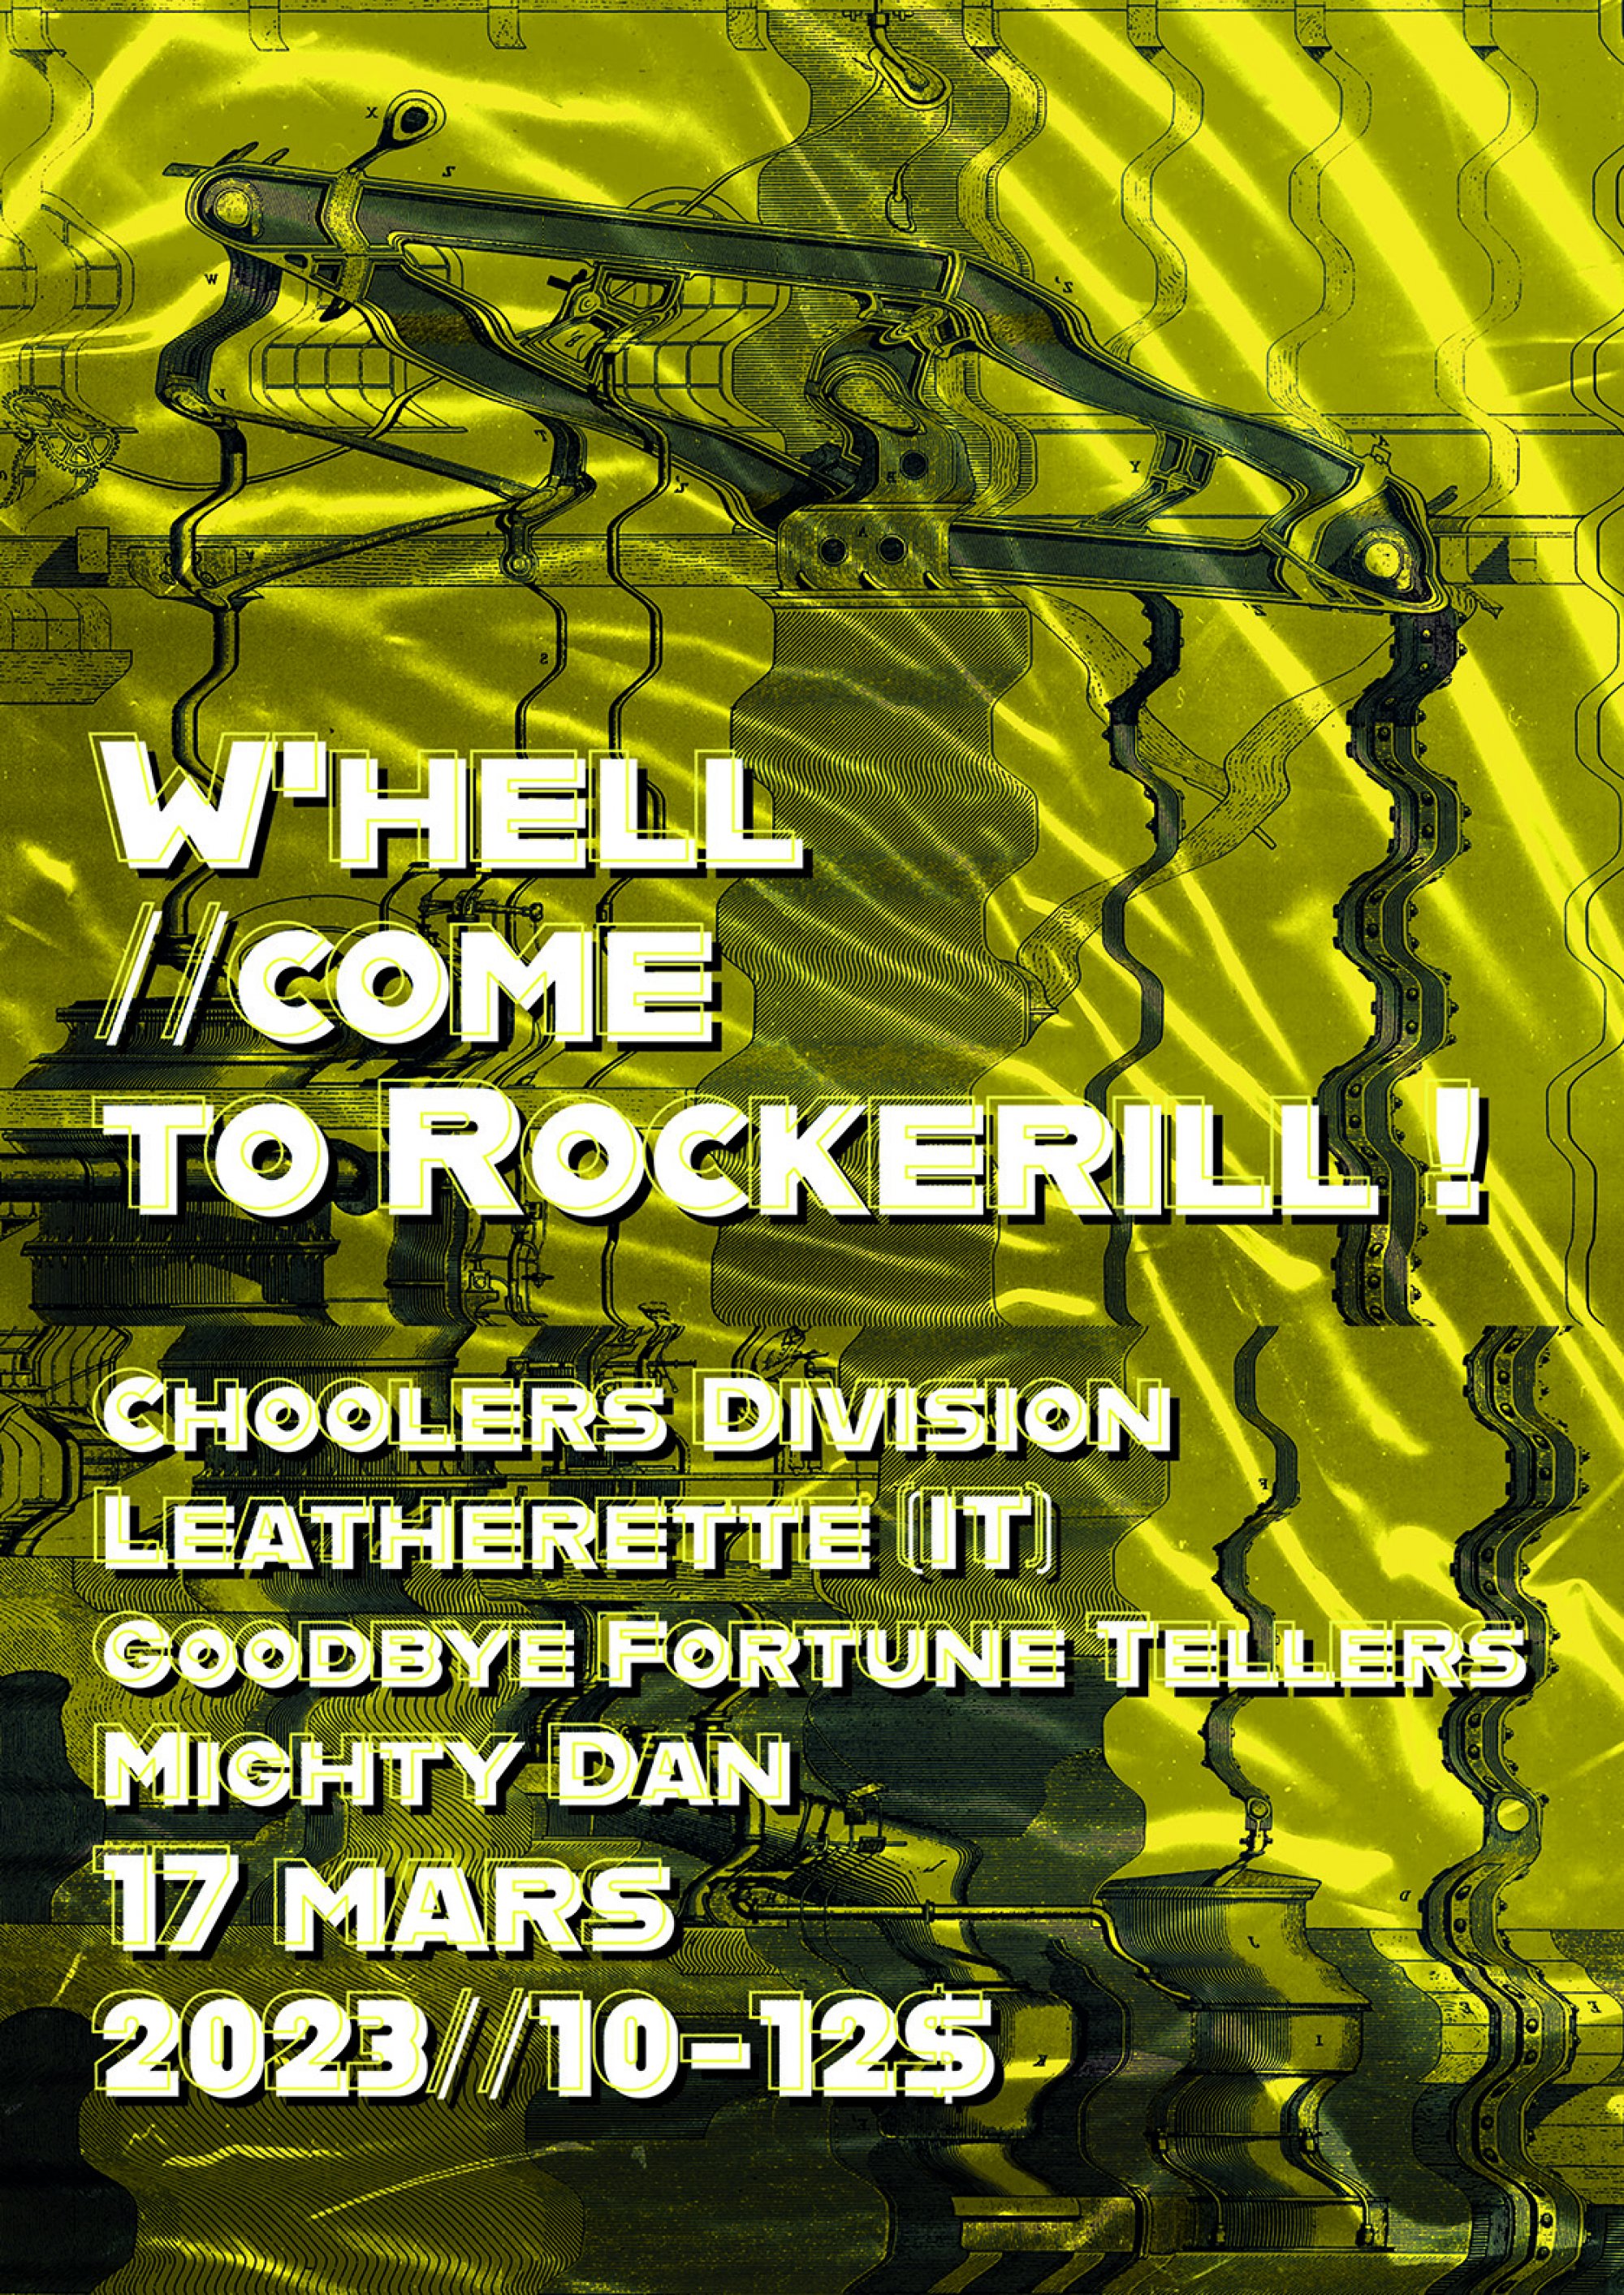 LES EXTRAS: W'HELL COME TO ROCKERILL !